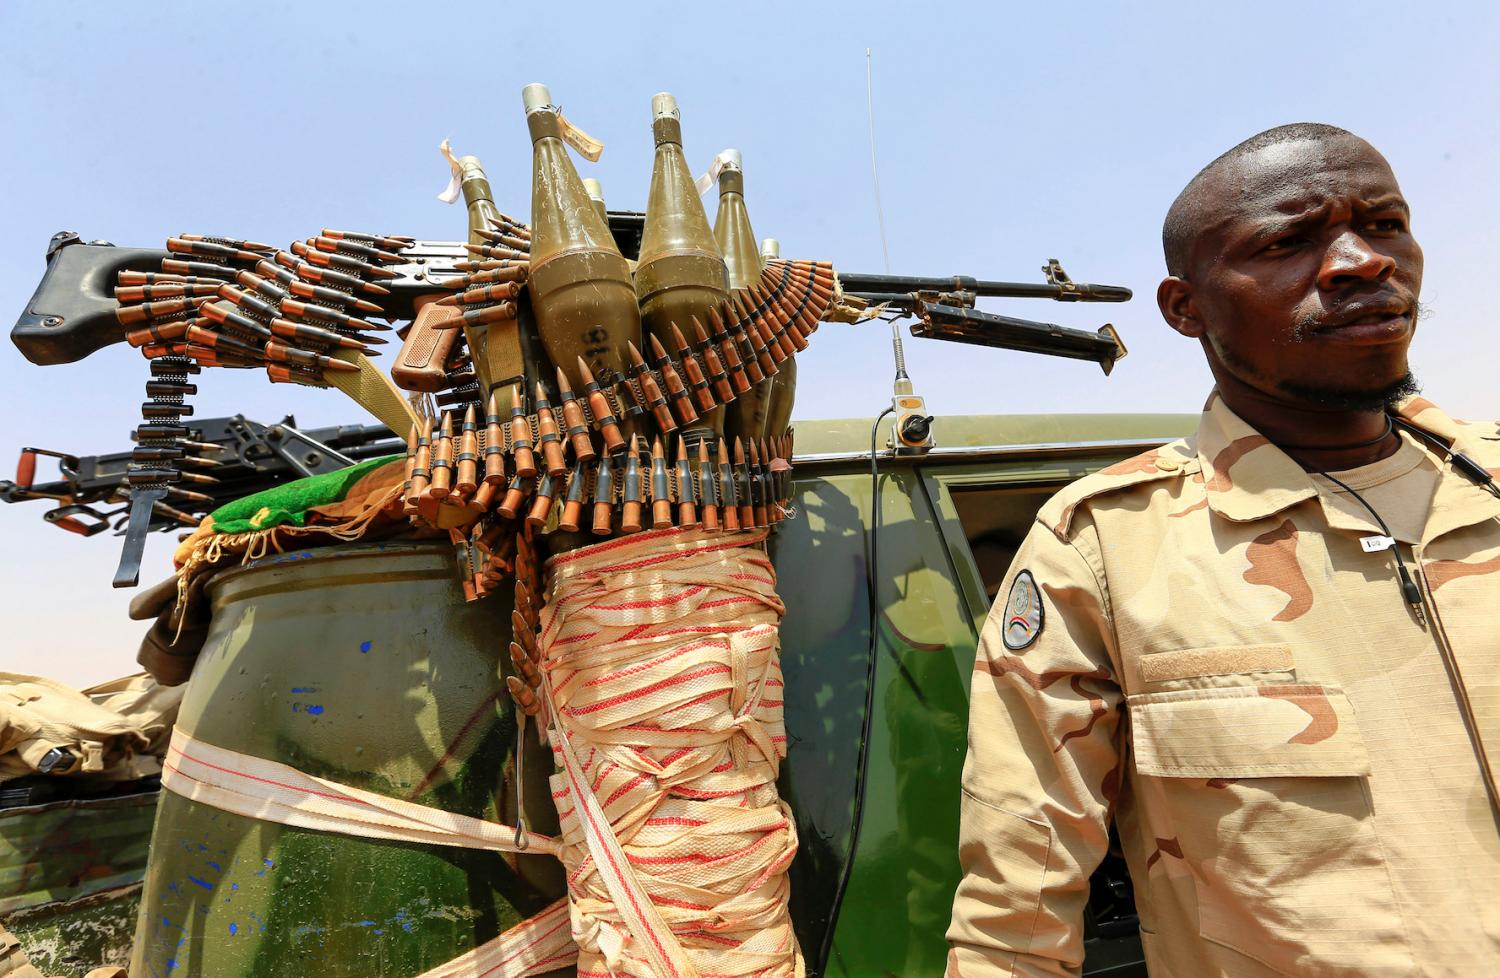 A member Sudan's paramilitary Rapid Support Forces (RSF) stand next to a vehicle during an operation to locate and arrest Irregular migrants from Ethiopia, Sudan and Chad who were abandoned by traffickers in a remote desert area near the Libyan border and taken to the Khartoum State border, Sudan September 25, 2019.